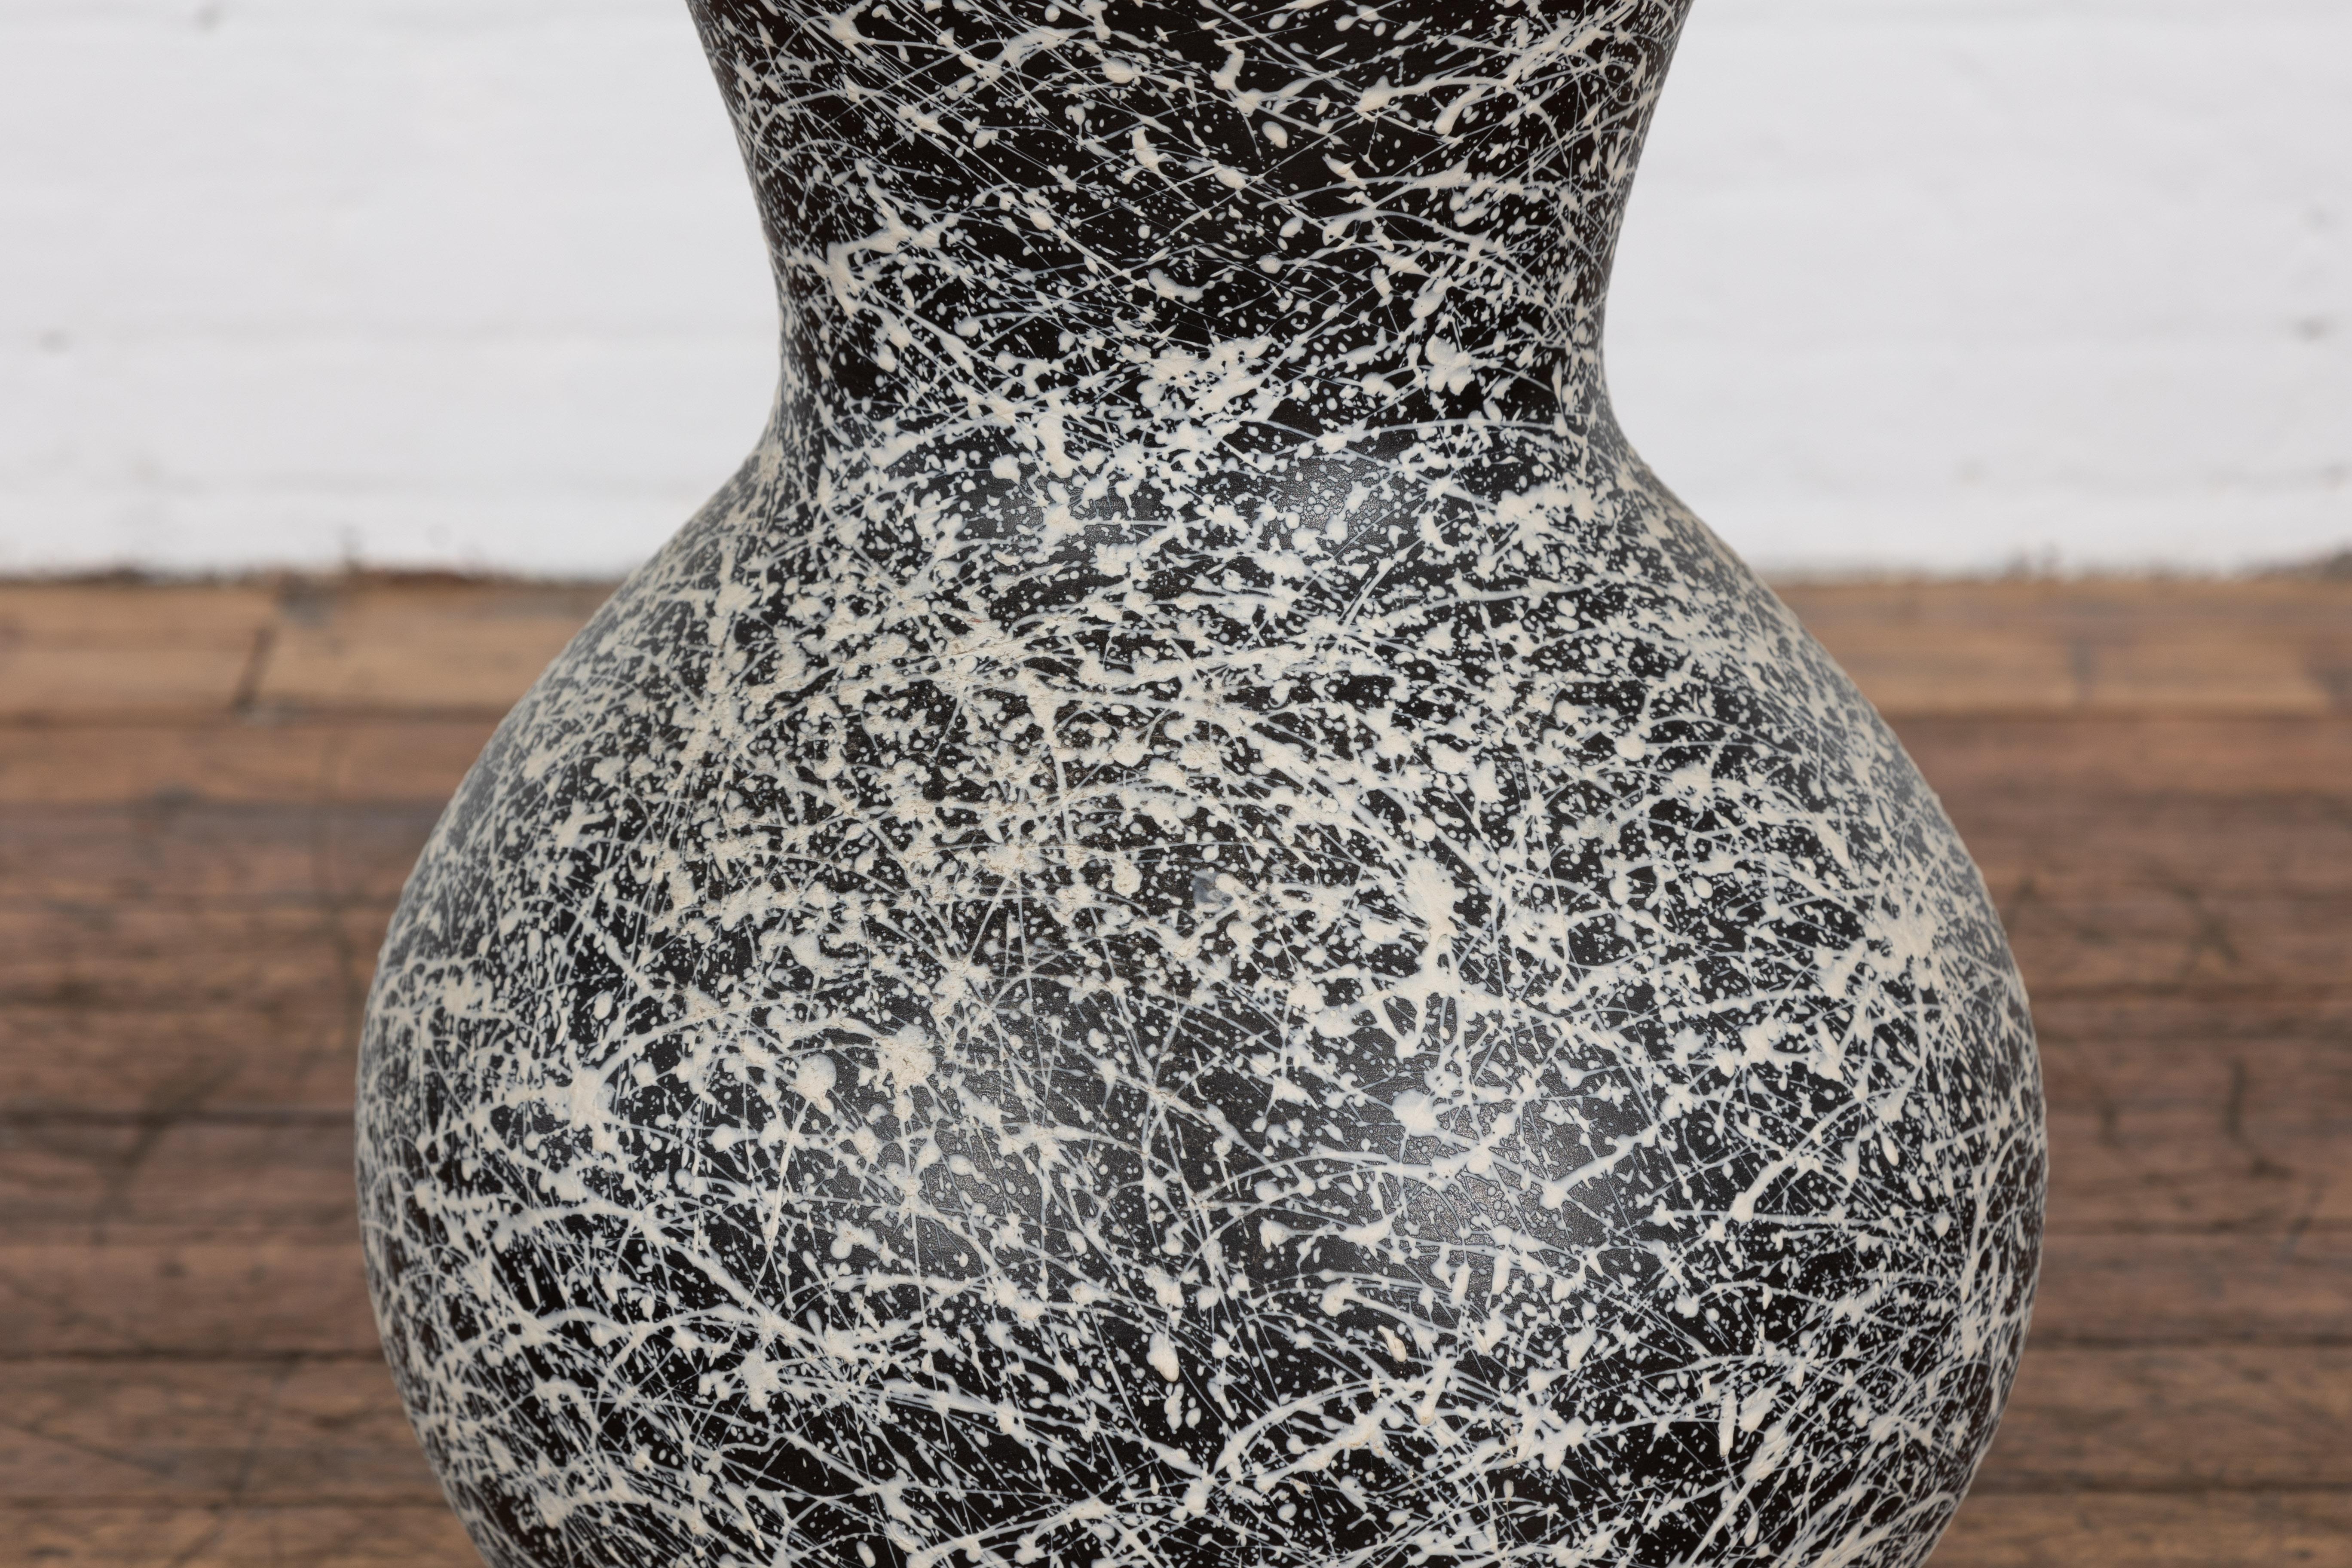 Ceramic Prem Collection Artisan Made Black and White Vase with Dripping Décor For Sale